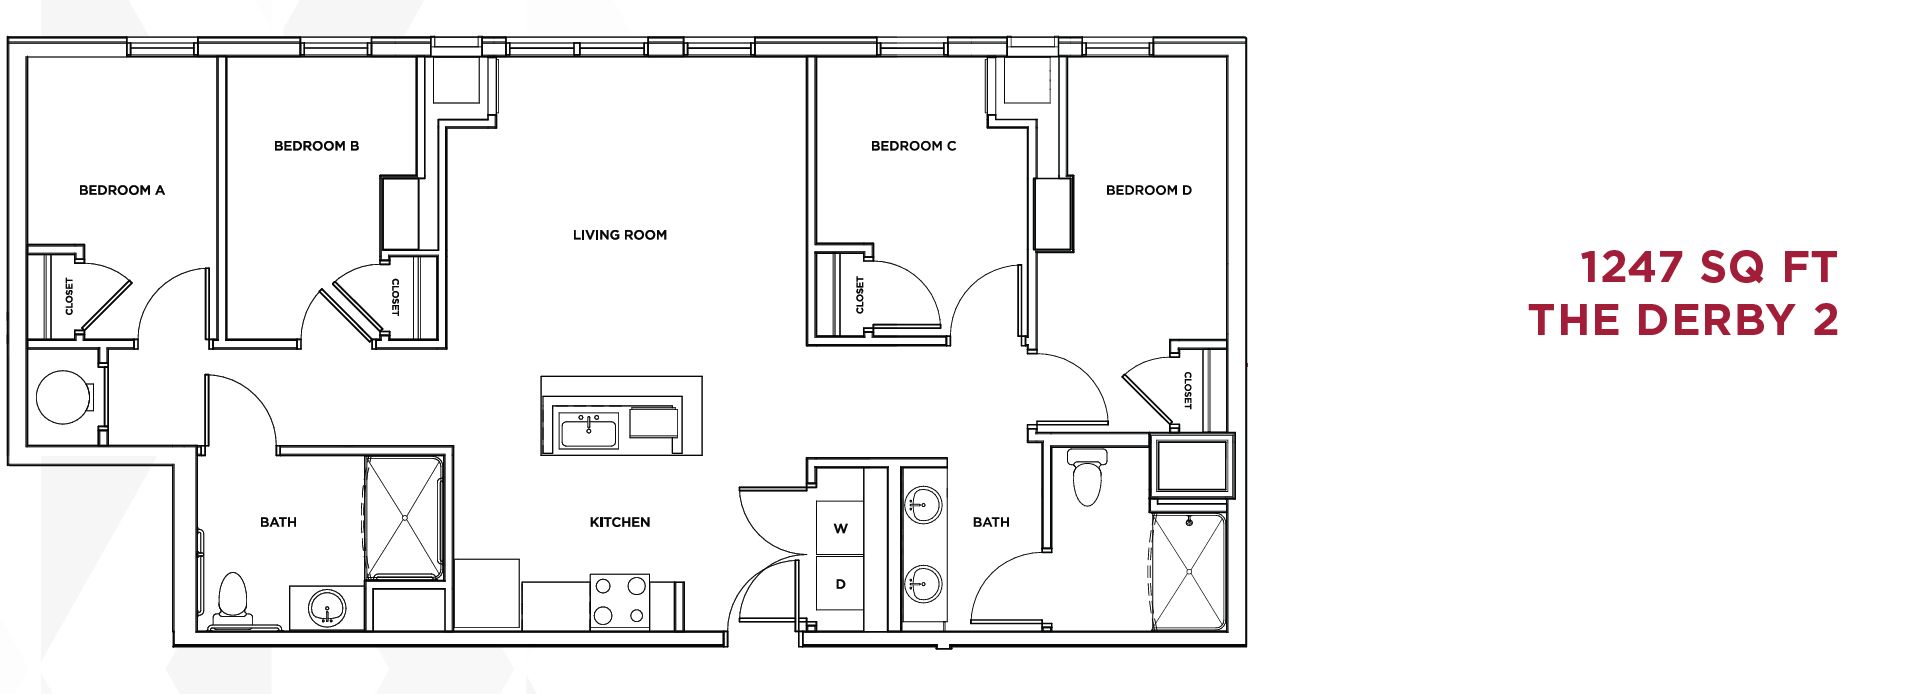 The Standard at Philadelphia at 119 South 31st Street. Floor plan of a four-bedroom apartment of type Derby. Credit: Landmark Properties